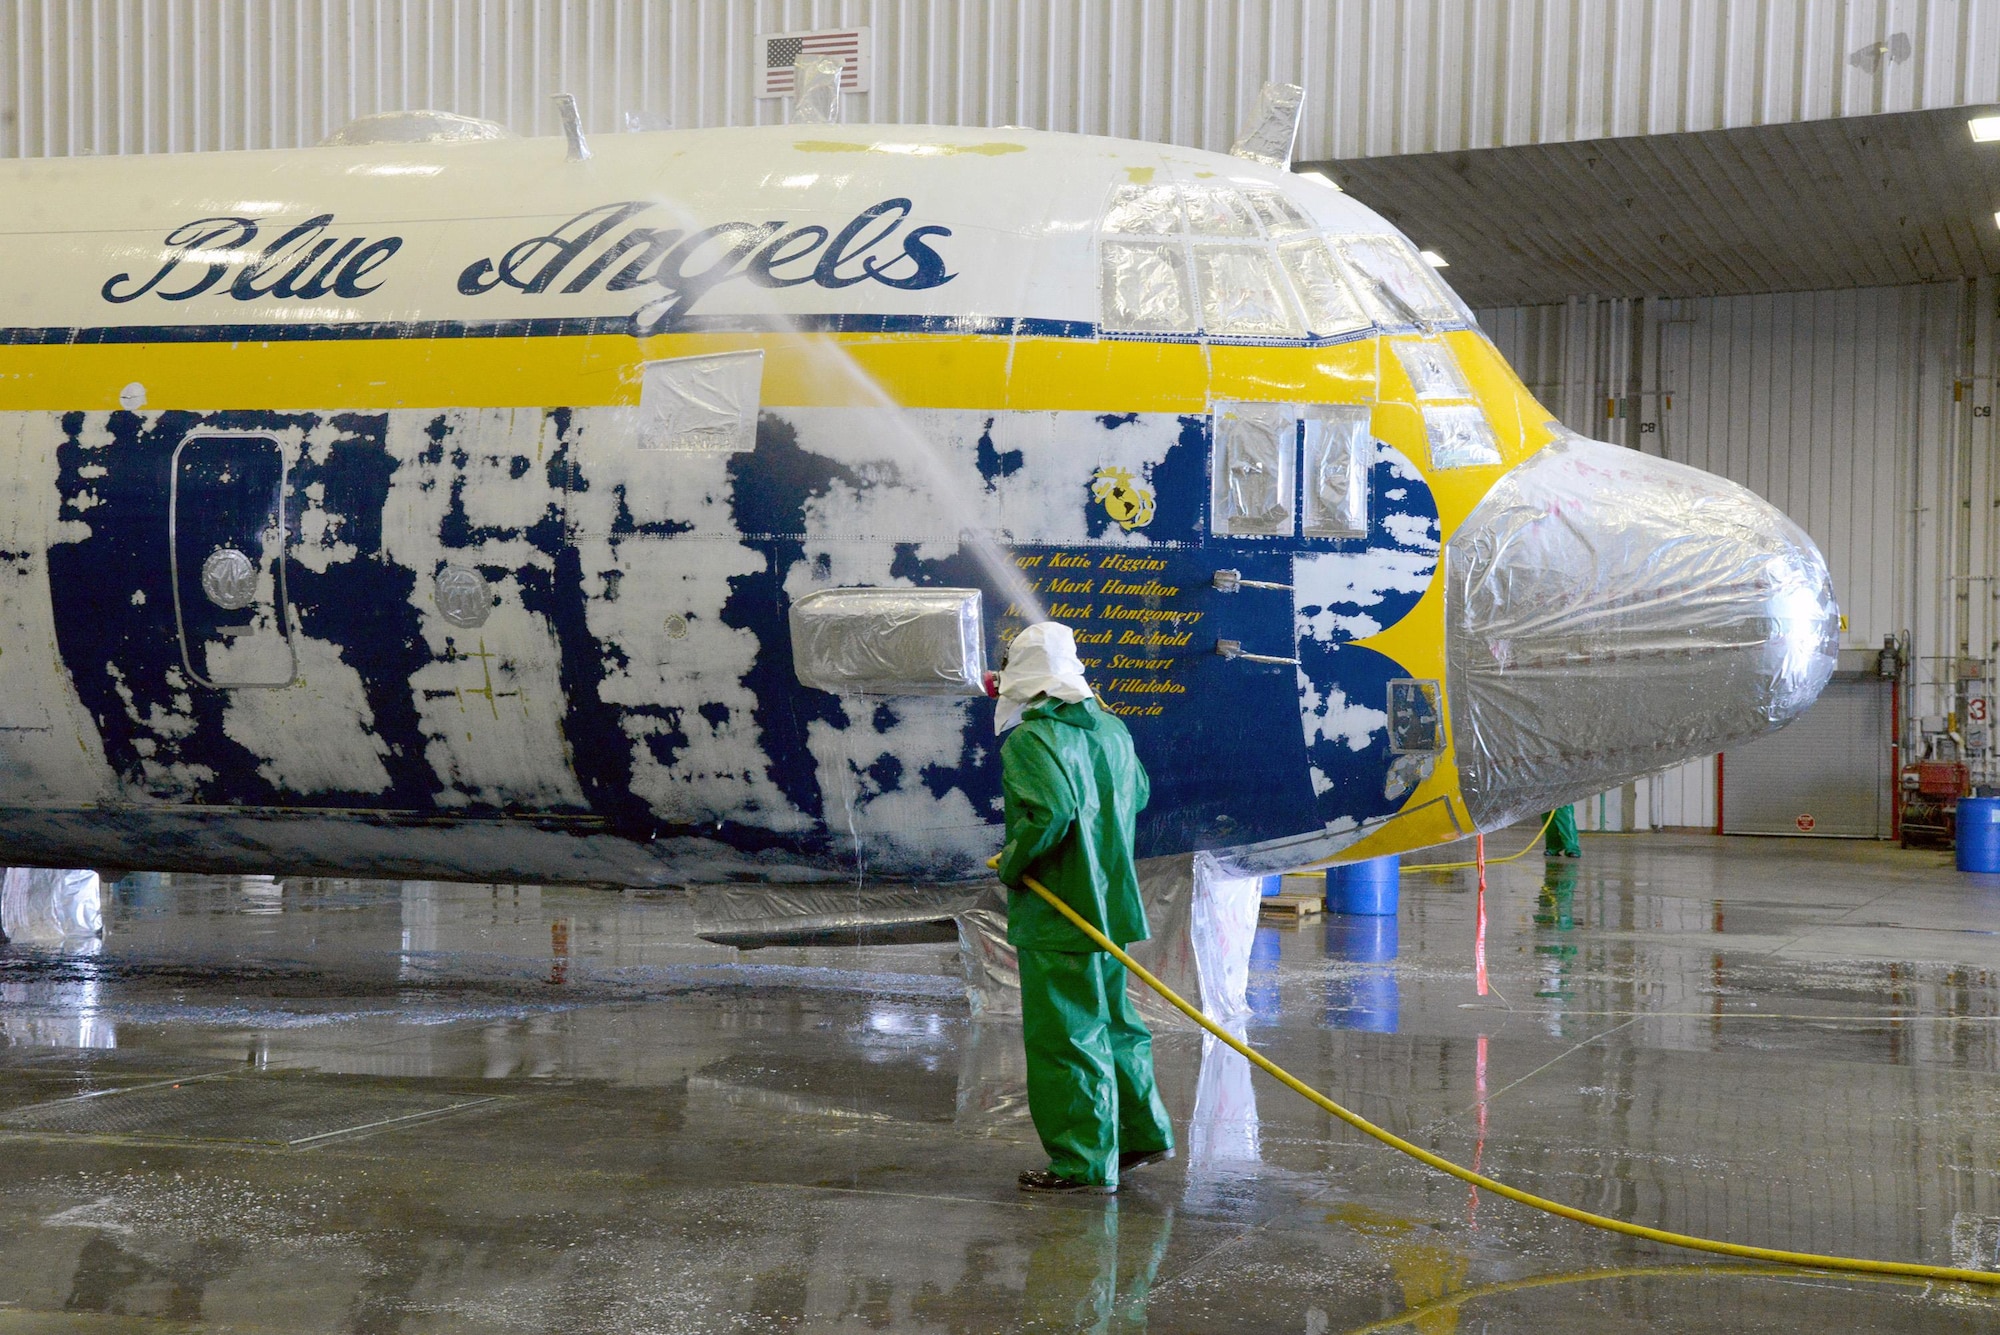 Fat Albert, the Blue Angels’ C-130 cargo plane used for transporting crew and equipment to air shows around the country, is currently undergoing a chemical de-paint process here at Tinker after severe corrosion was found on it. It will take crews working three continuous shifts to thoroughly clean the aircraft of all paint, using a stripping agent to remove one layer at a time. Once the de-paint process and sheetmetal checks for any other corrosion are complete, Fat Albert will fly to Hill Air Force Base, Utah, for full programmed depot maintenance and paint. (Air Force photo by Kelly White)